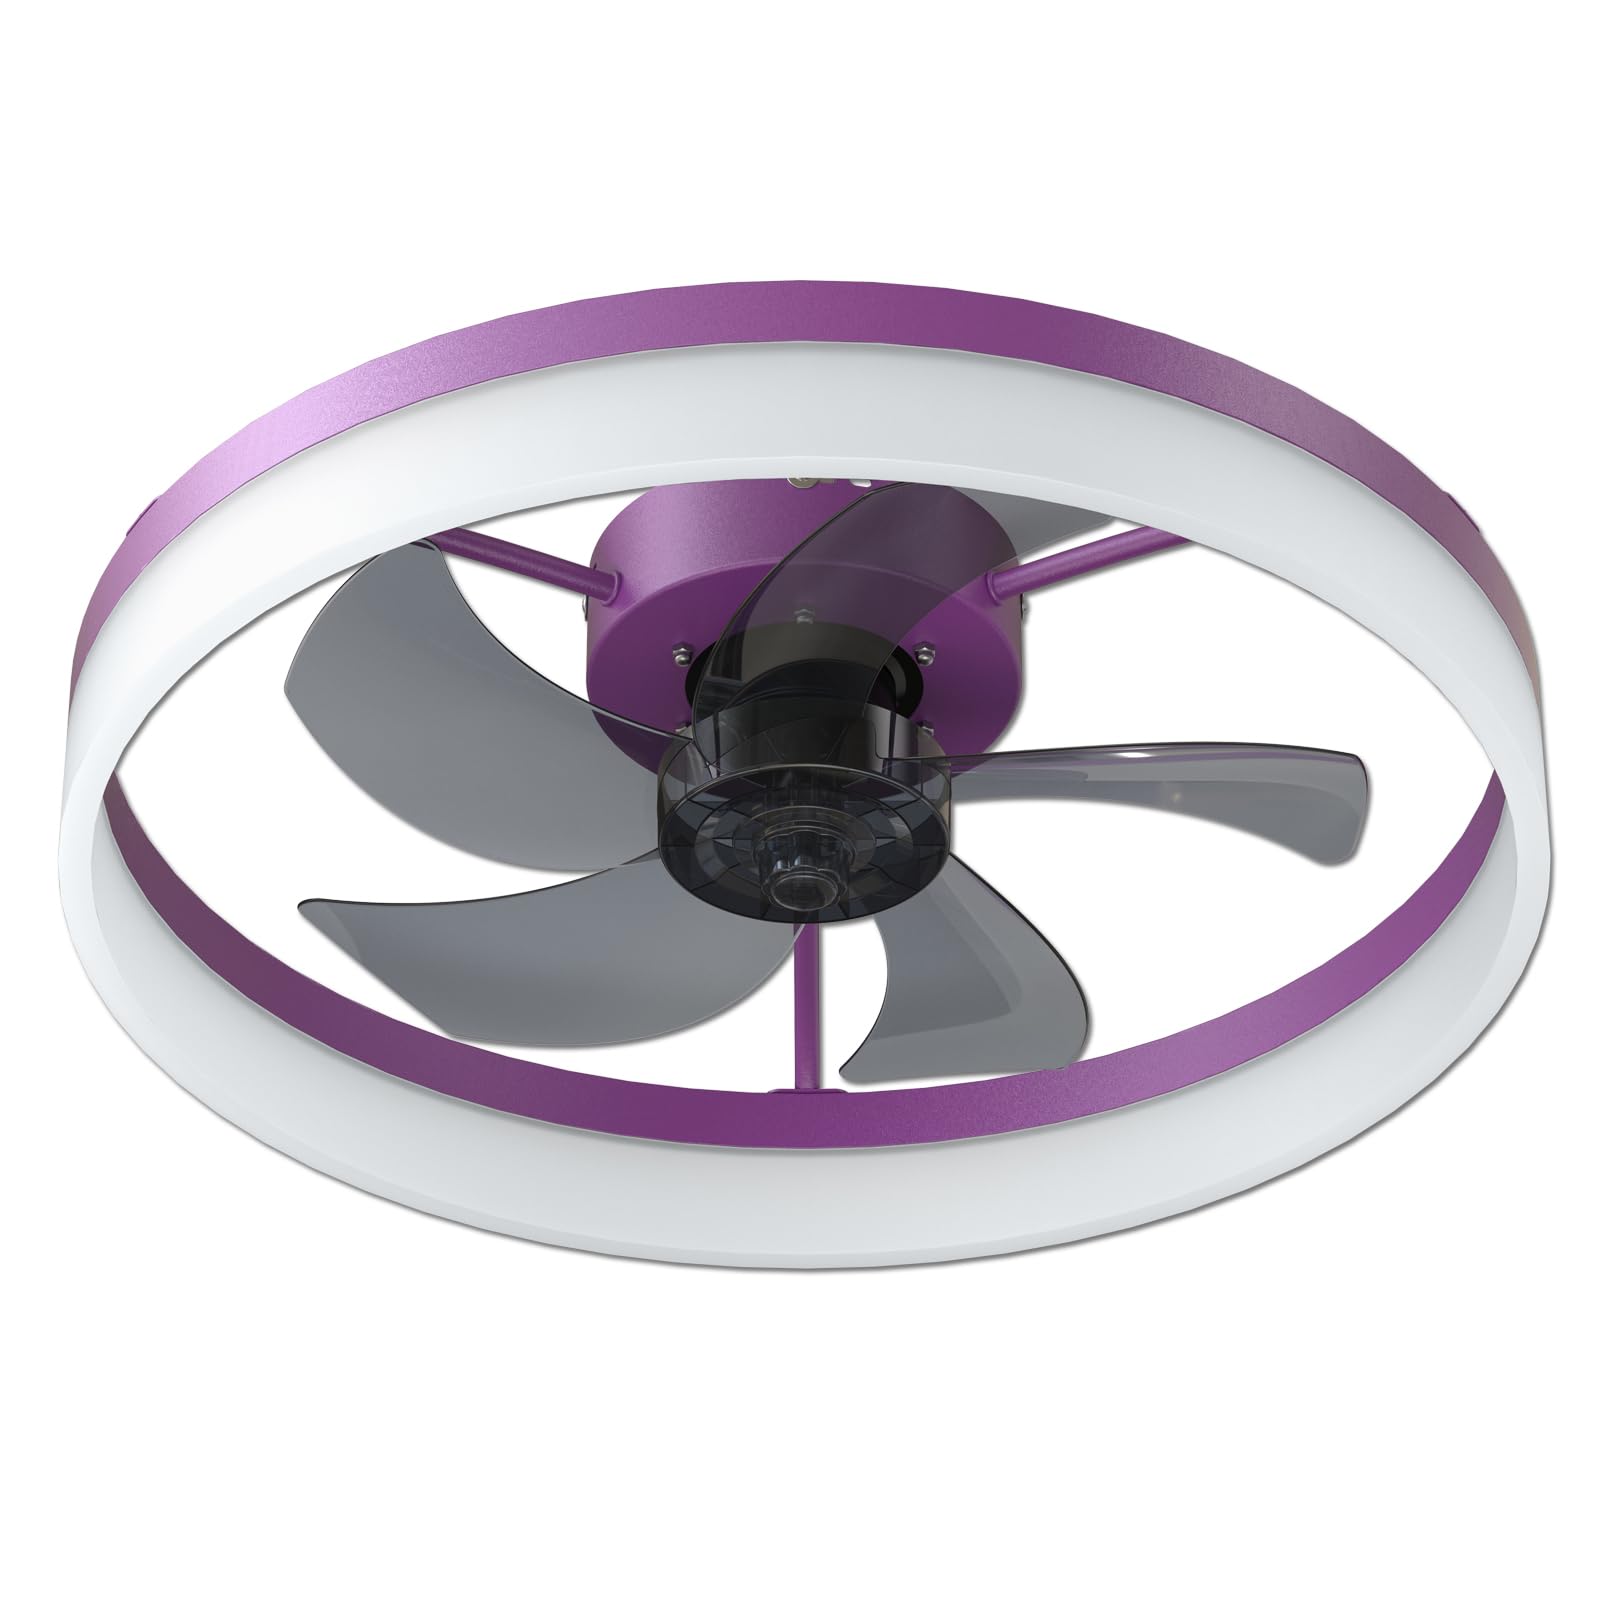 IVYHAVEN Ceiling Fan with Remote Control Memory Functions 21dB Low Noise 6 Adjustable Speeds Dimmable Led Ceiling Fan for Hallways Balconies Patios Purple